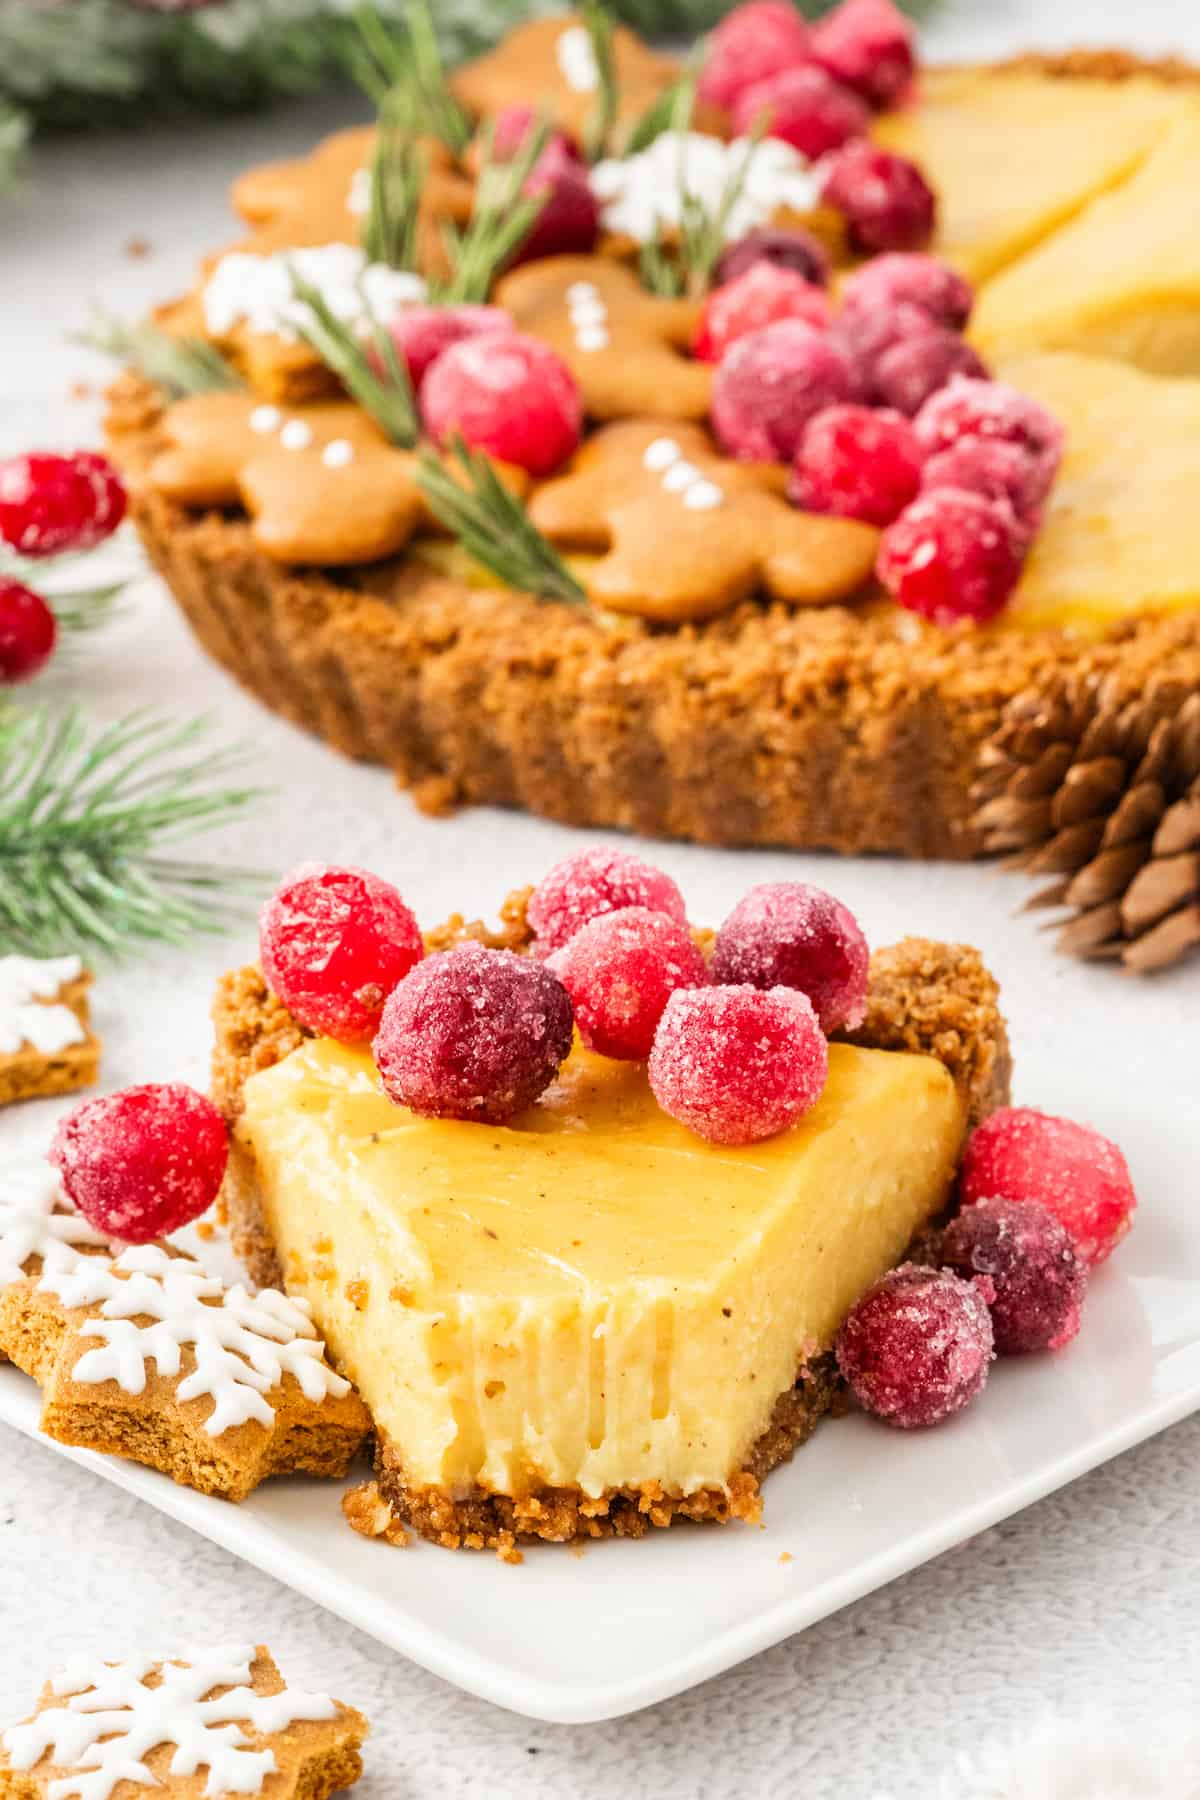 A slice of eggnog tart with cranberries and gingerbread cookies on a plate.